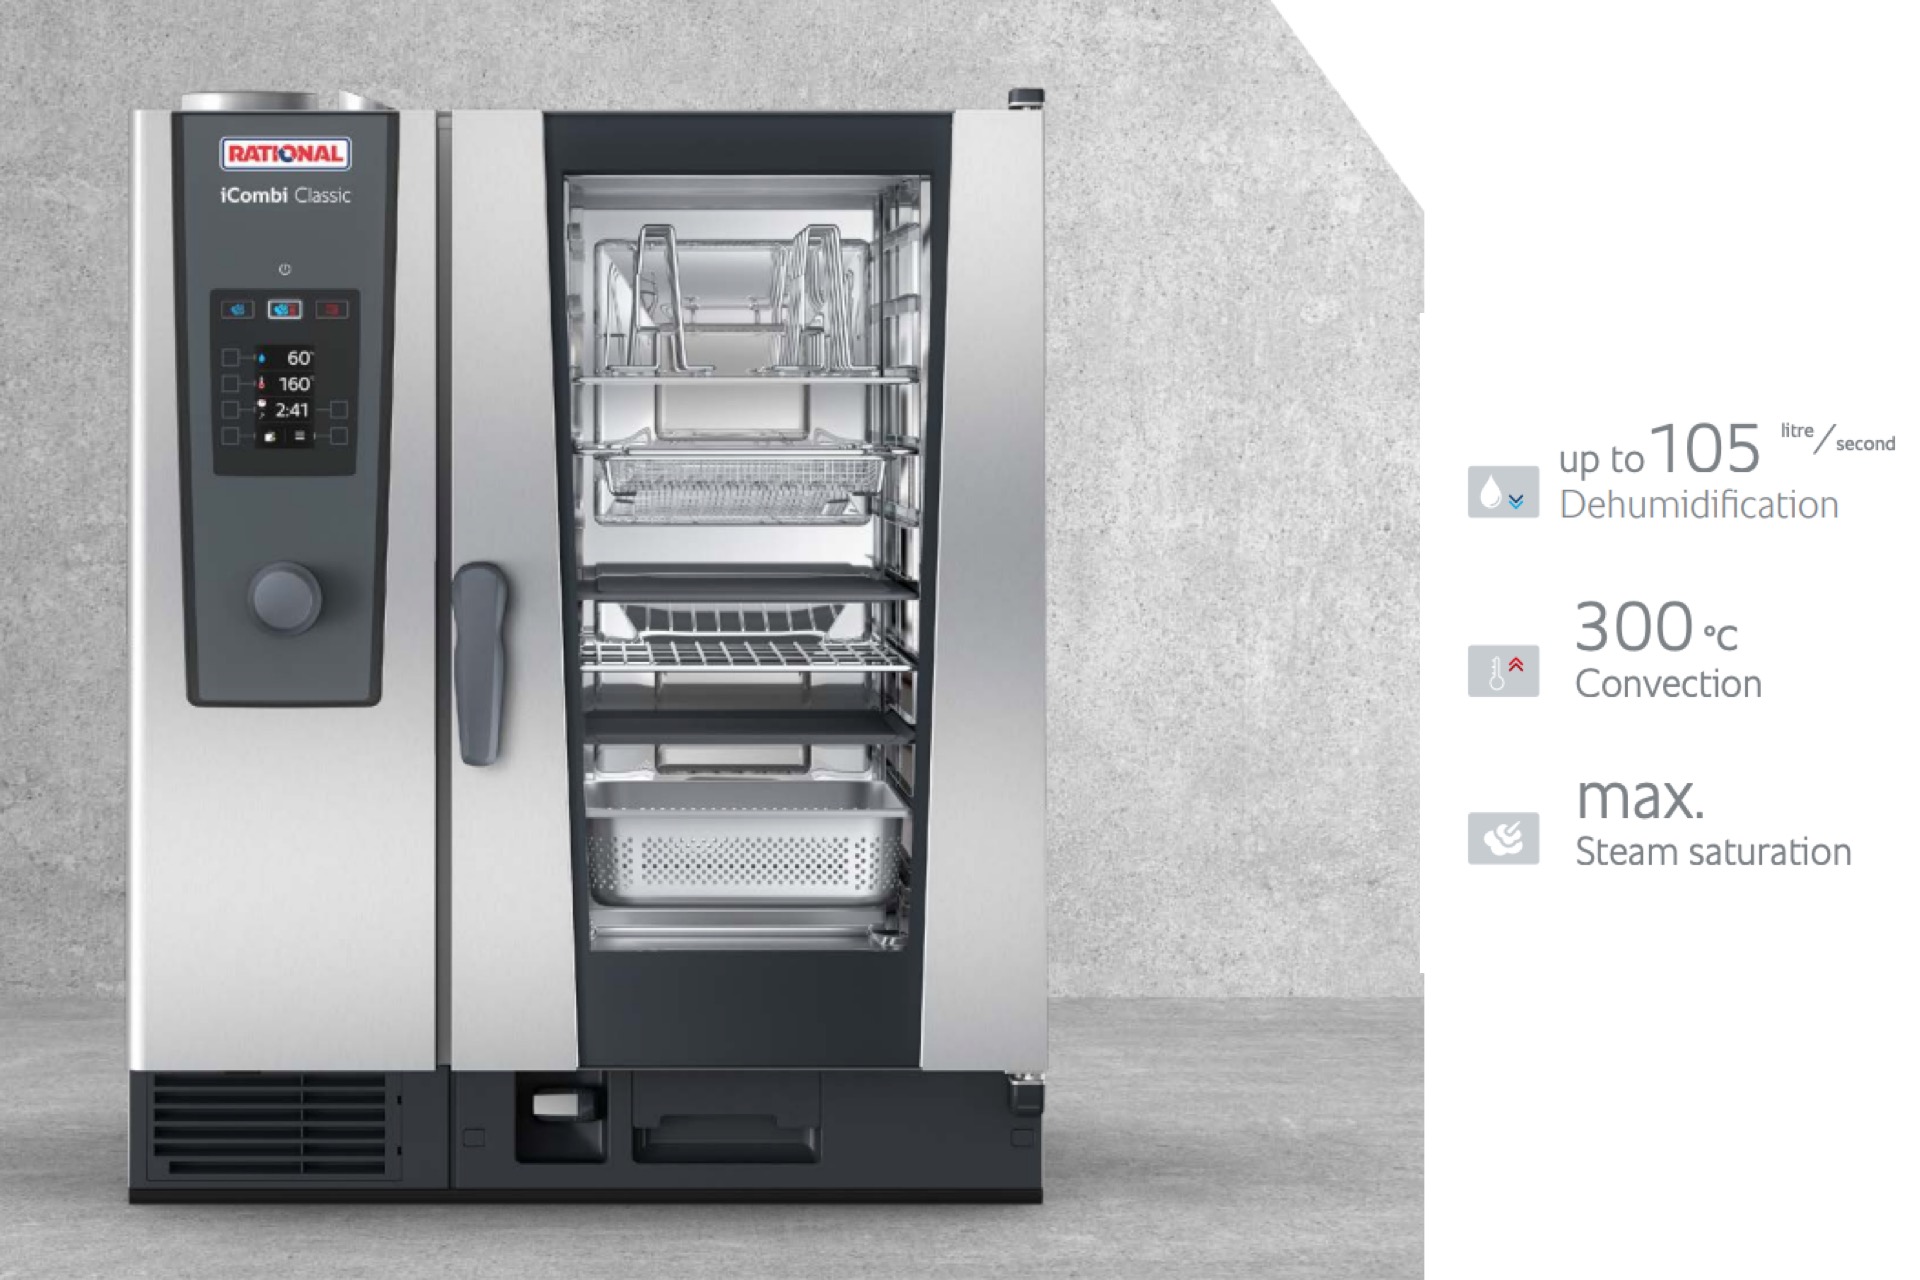 Anton's Game-Changing Discovery: Rational ICC101 iCombi Classic Combi Oven